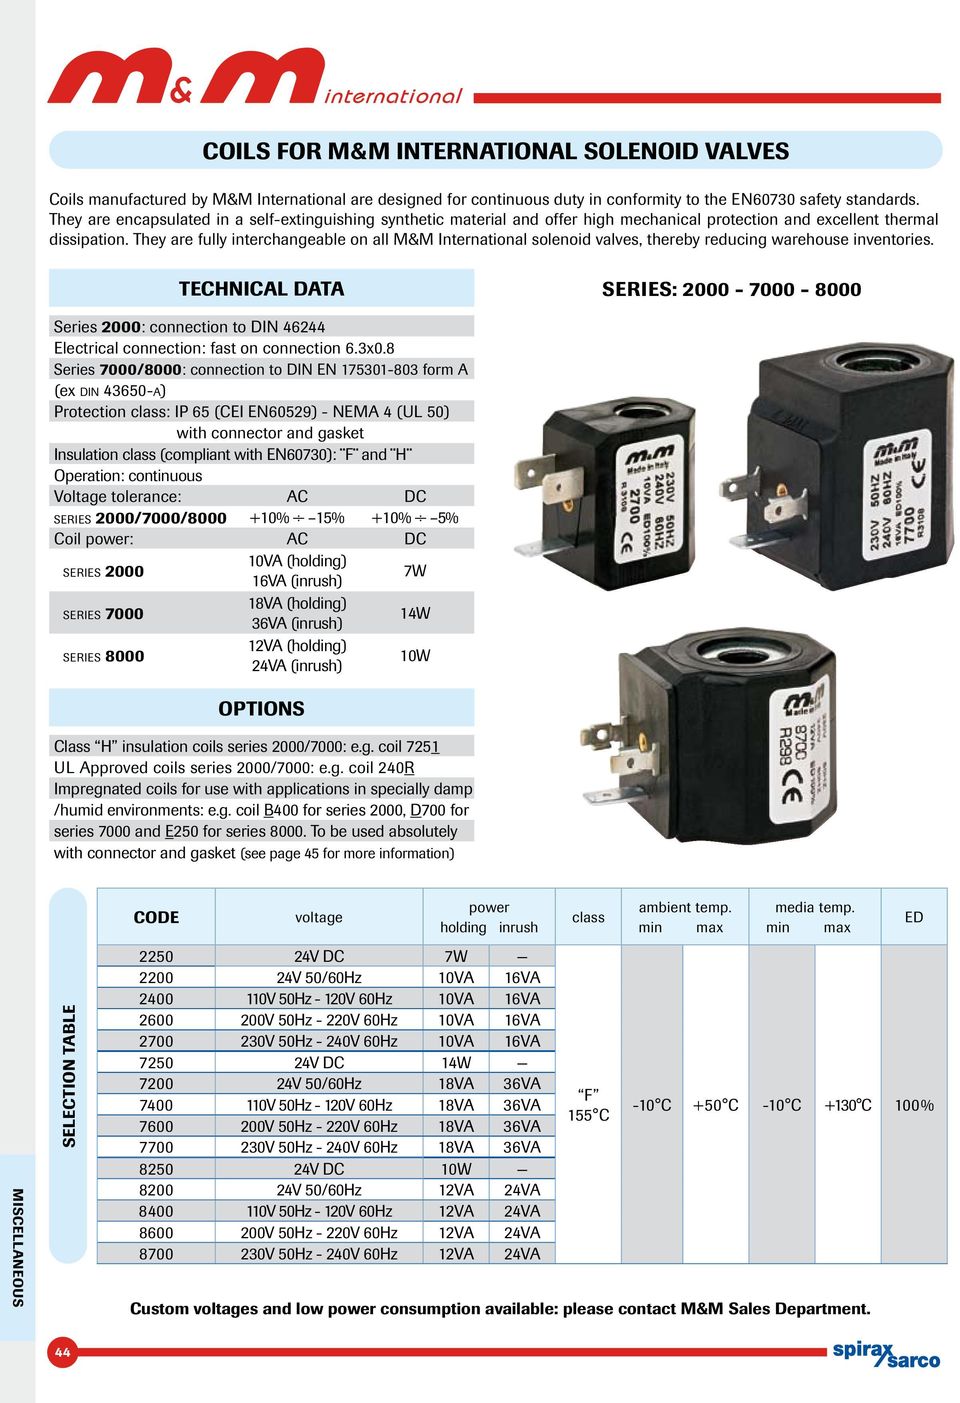 They are fully interchangeable on all M&M International solenoid valves, thereby reducing warehouse inventories.